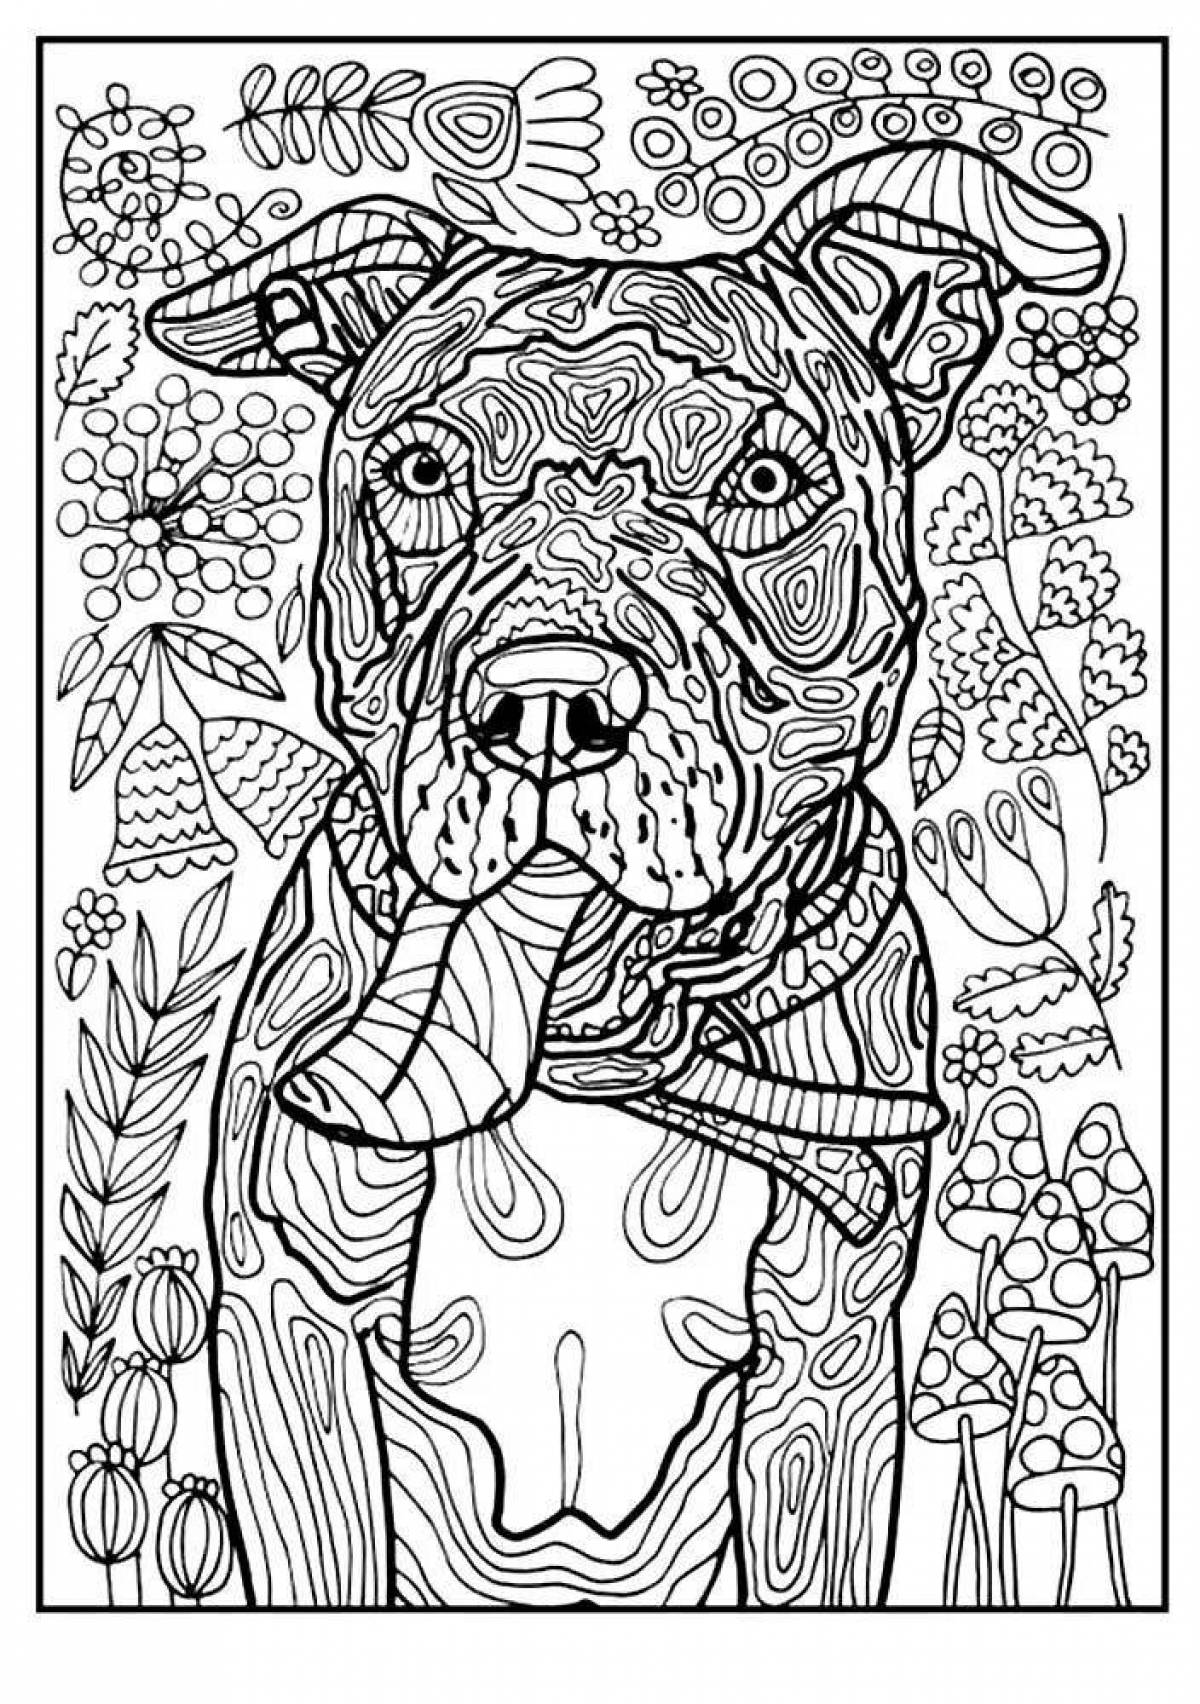 Friendly dog ​​coloring pages for adults